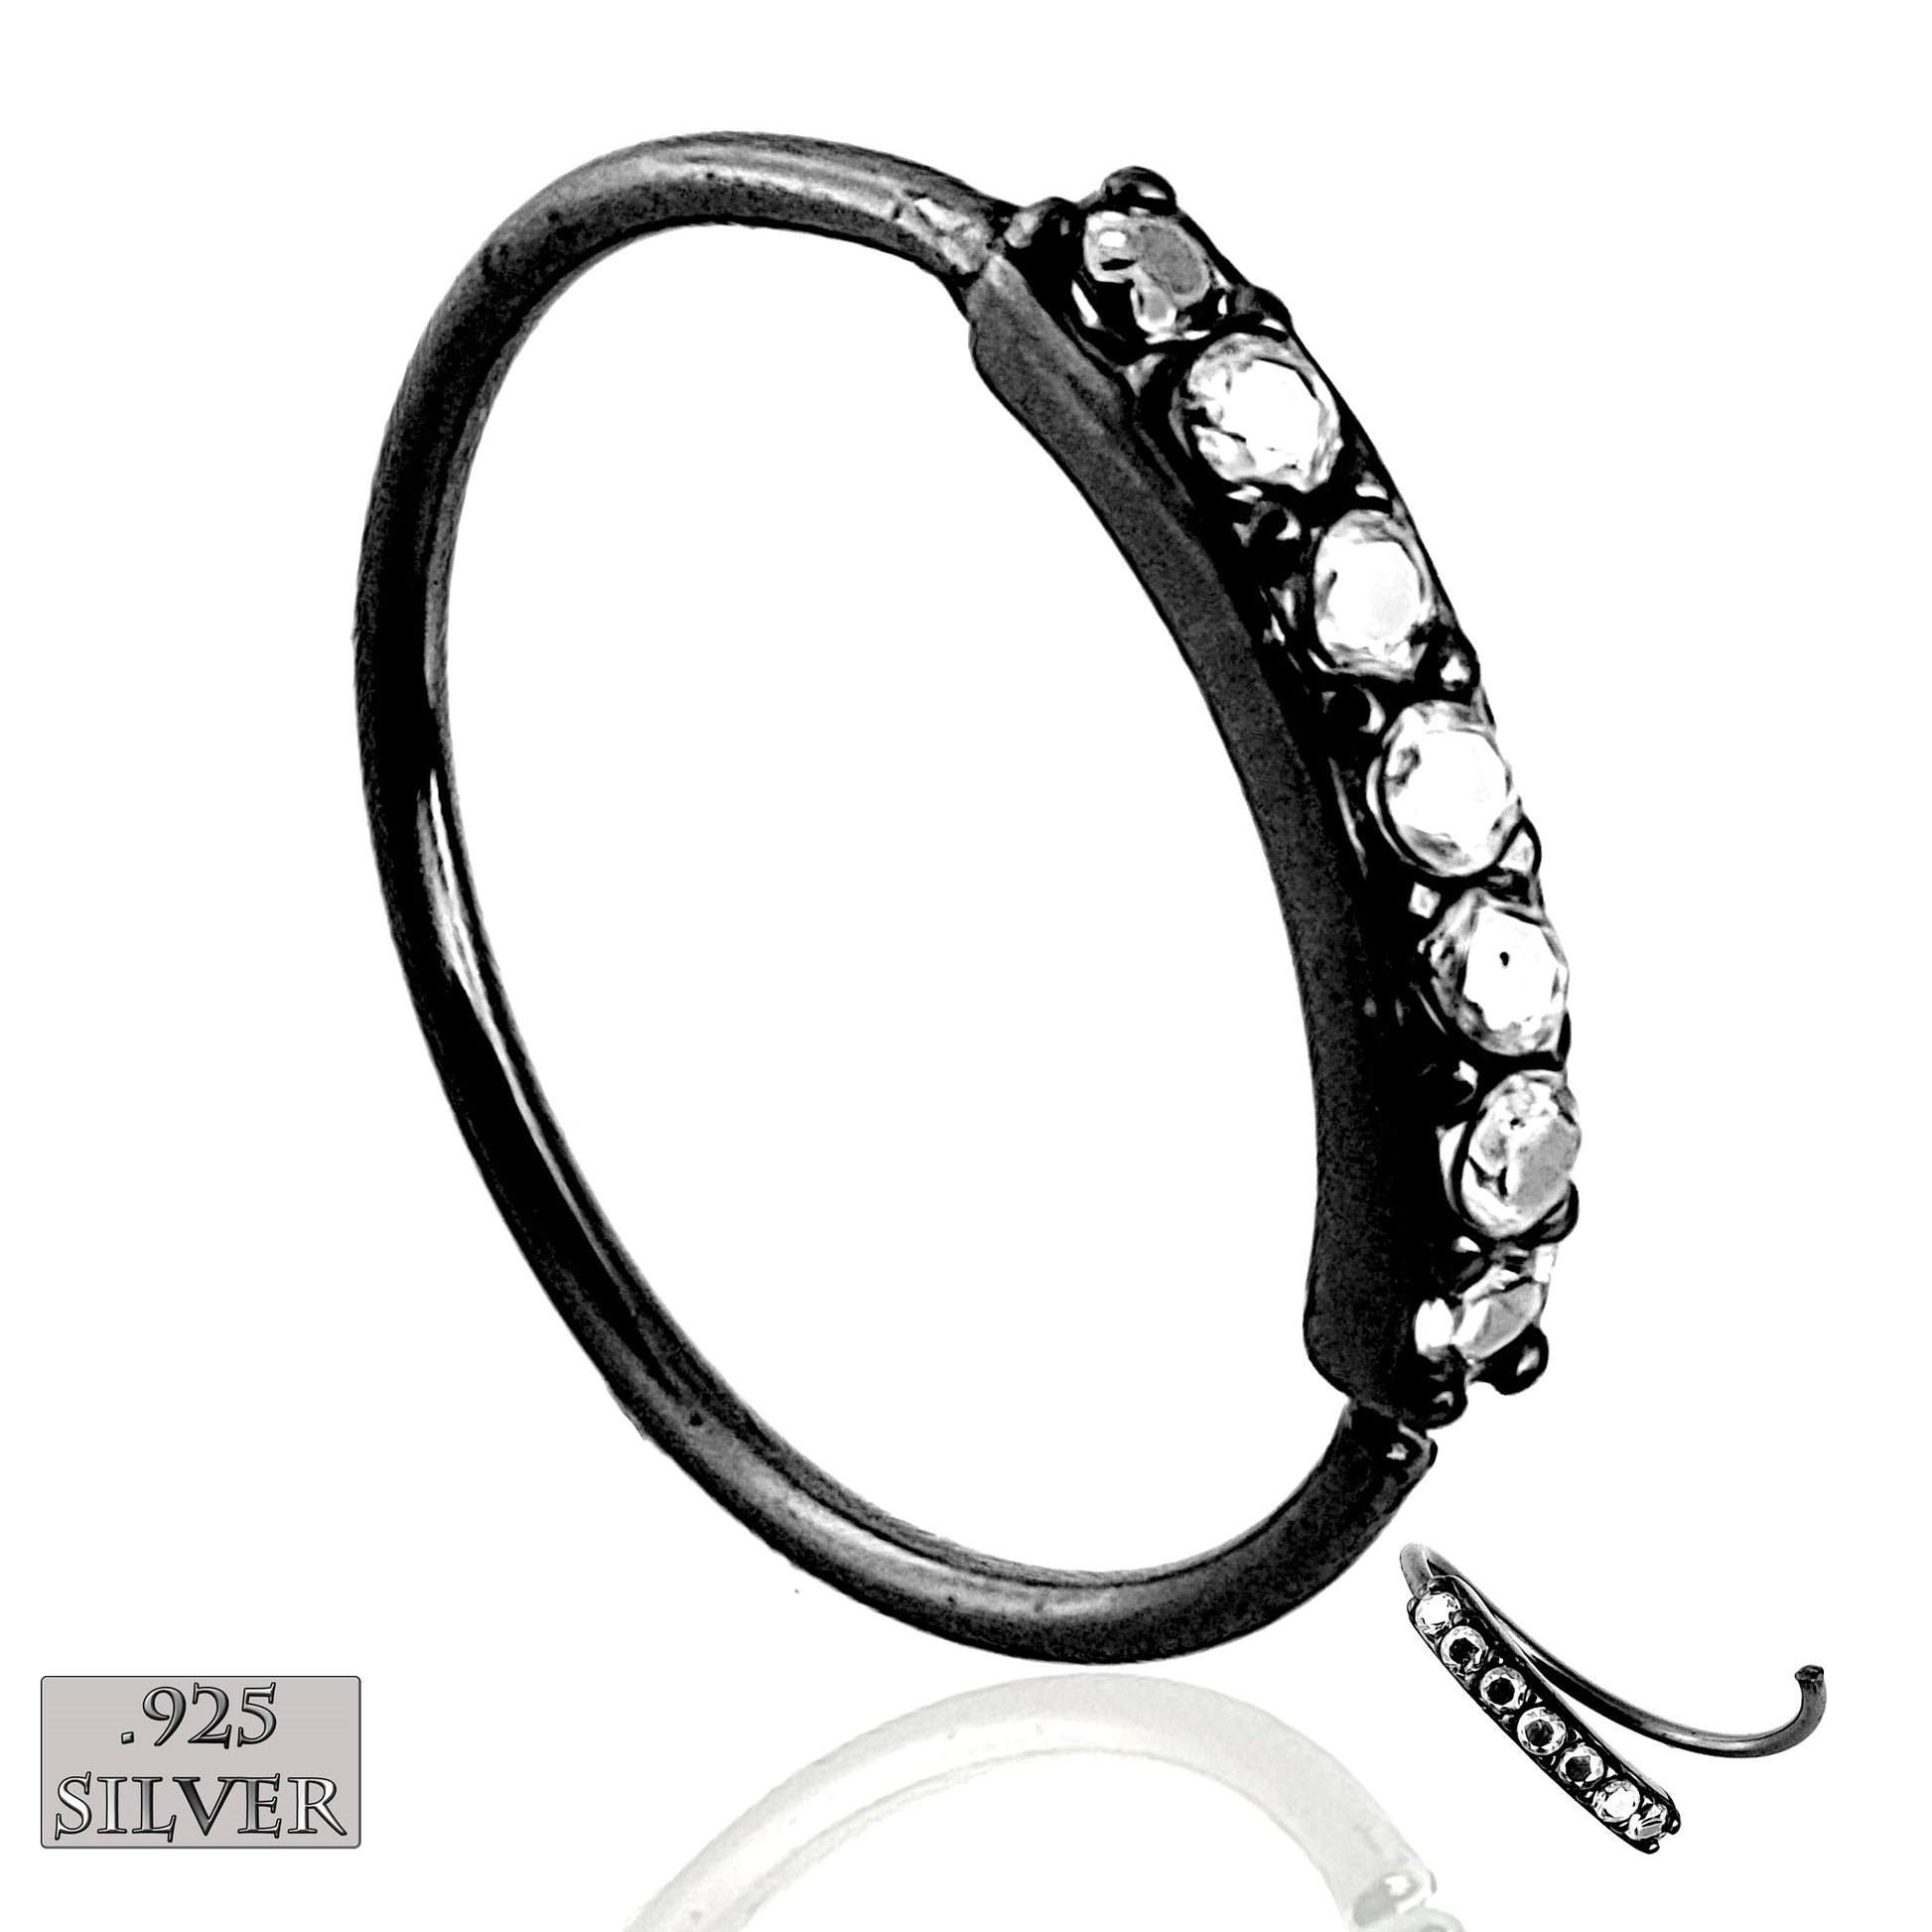 Black sterling silver nose hoop with 7 clear prong-set cz gems. 22 Gauge X 8mm. Just twist open the hoop to insert it in your nose, and twist the hoop back closed. 